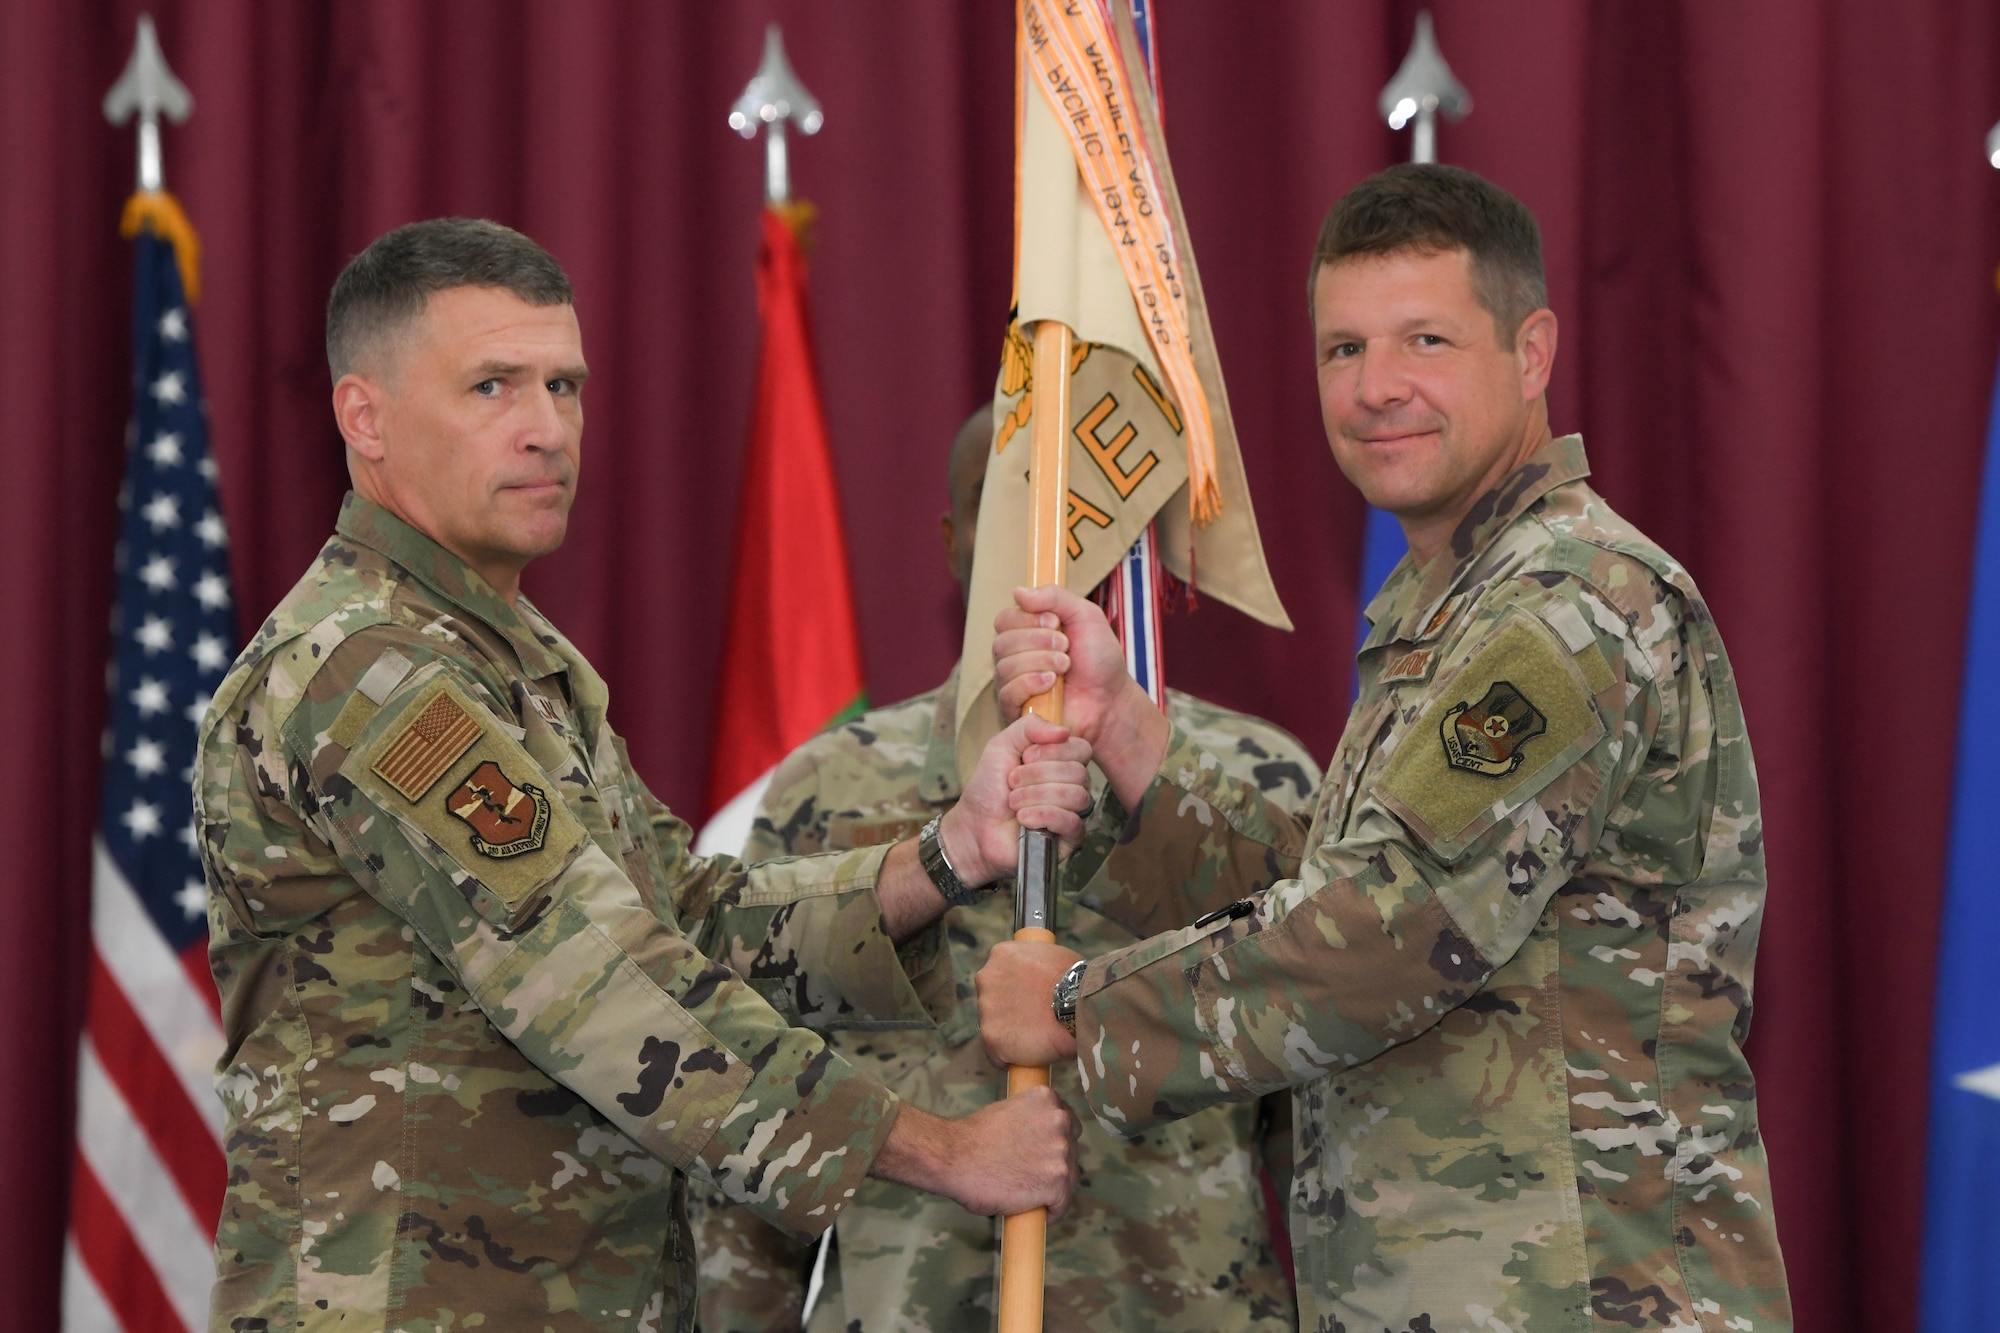 Brig. Gen. Andy “Spoo” Clark (left), the previous commander of the 380th Air Expeditionary Wing, relinquishes command to Brig. Gen. David “Shotgun” Lopez June 7, Al Dhafra Air Base, United Arab Emirates. Assuming this role, Lopez will be responsible for the Airmen and assets of 10 unique squadrons as well as the wing’s ground attack, intelligence, theatre security cooperation and in-transit airlift mission support.